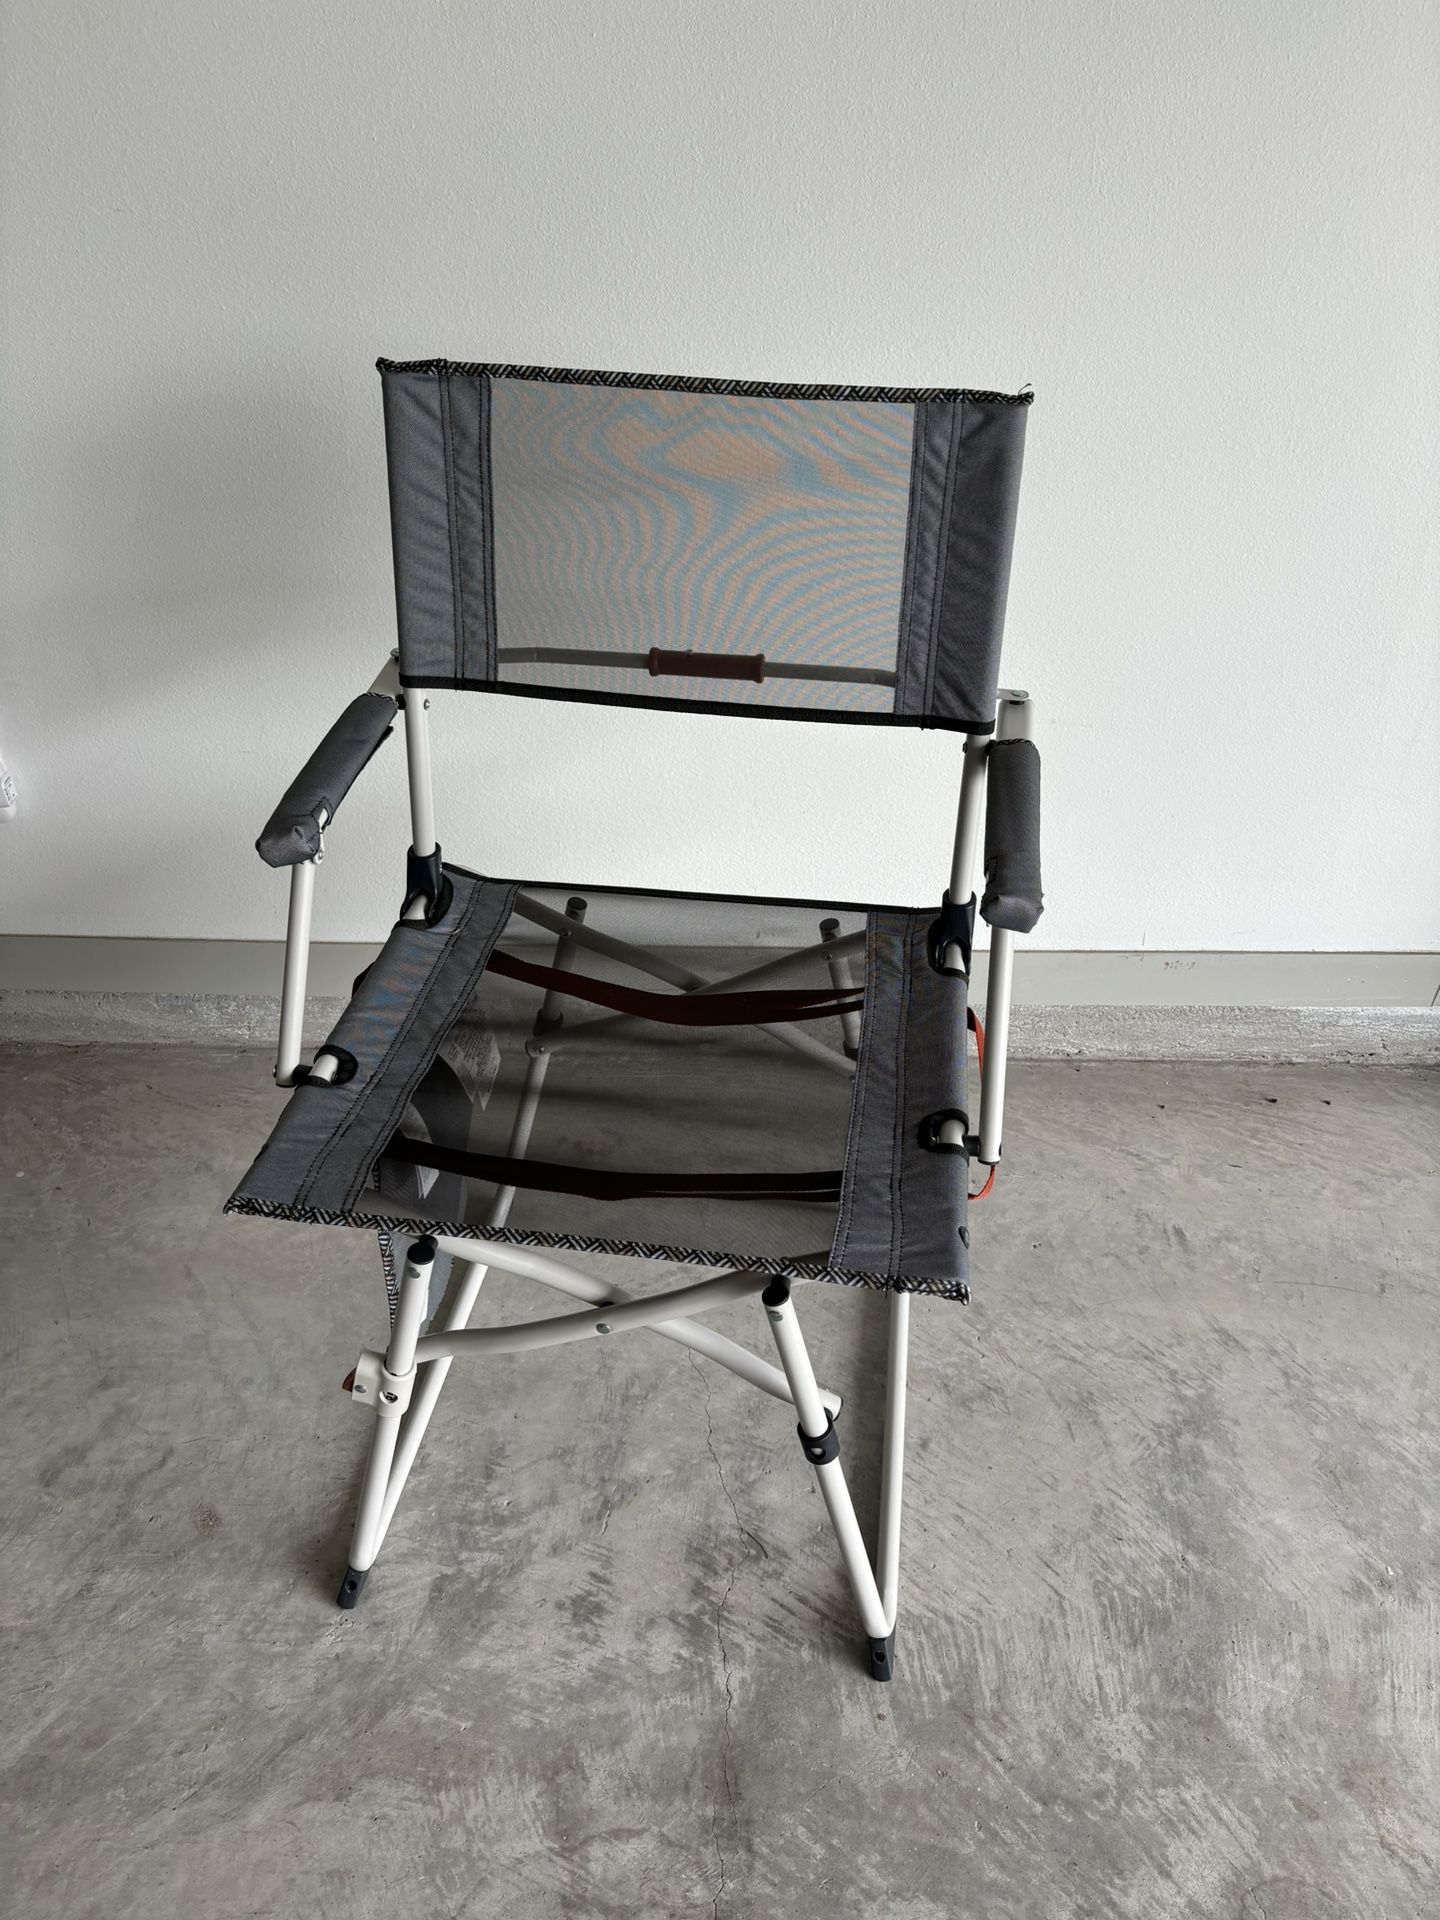 Brand new folding camping chair